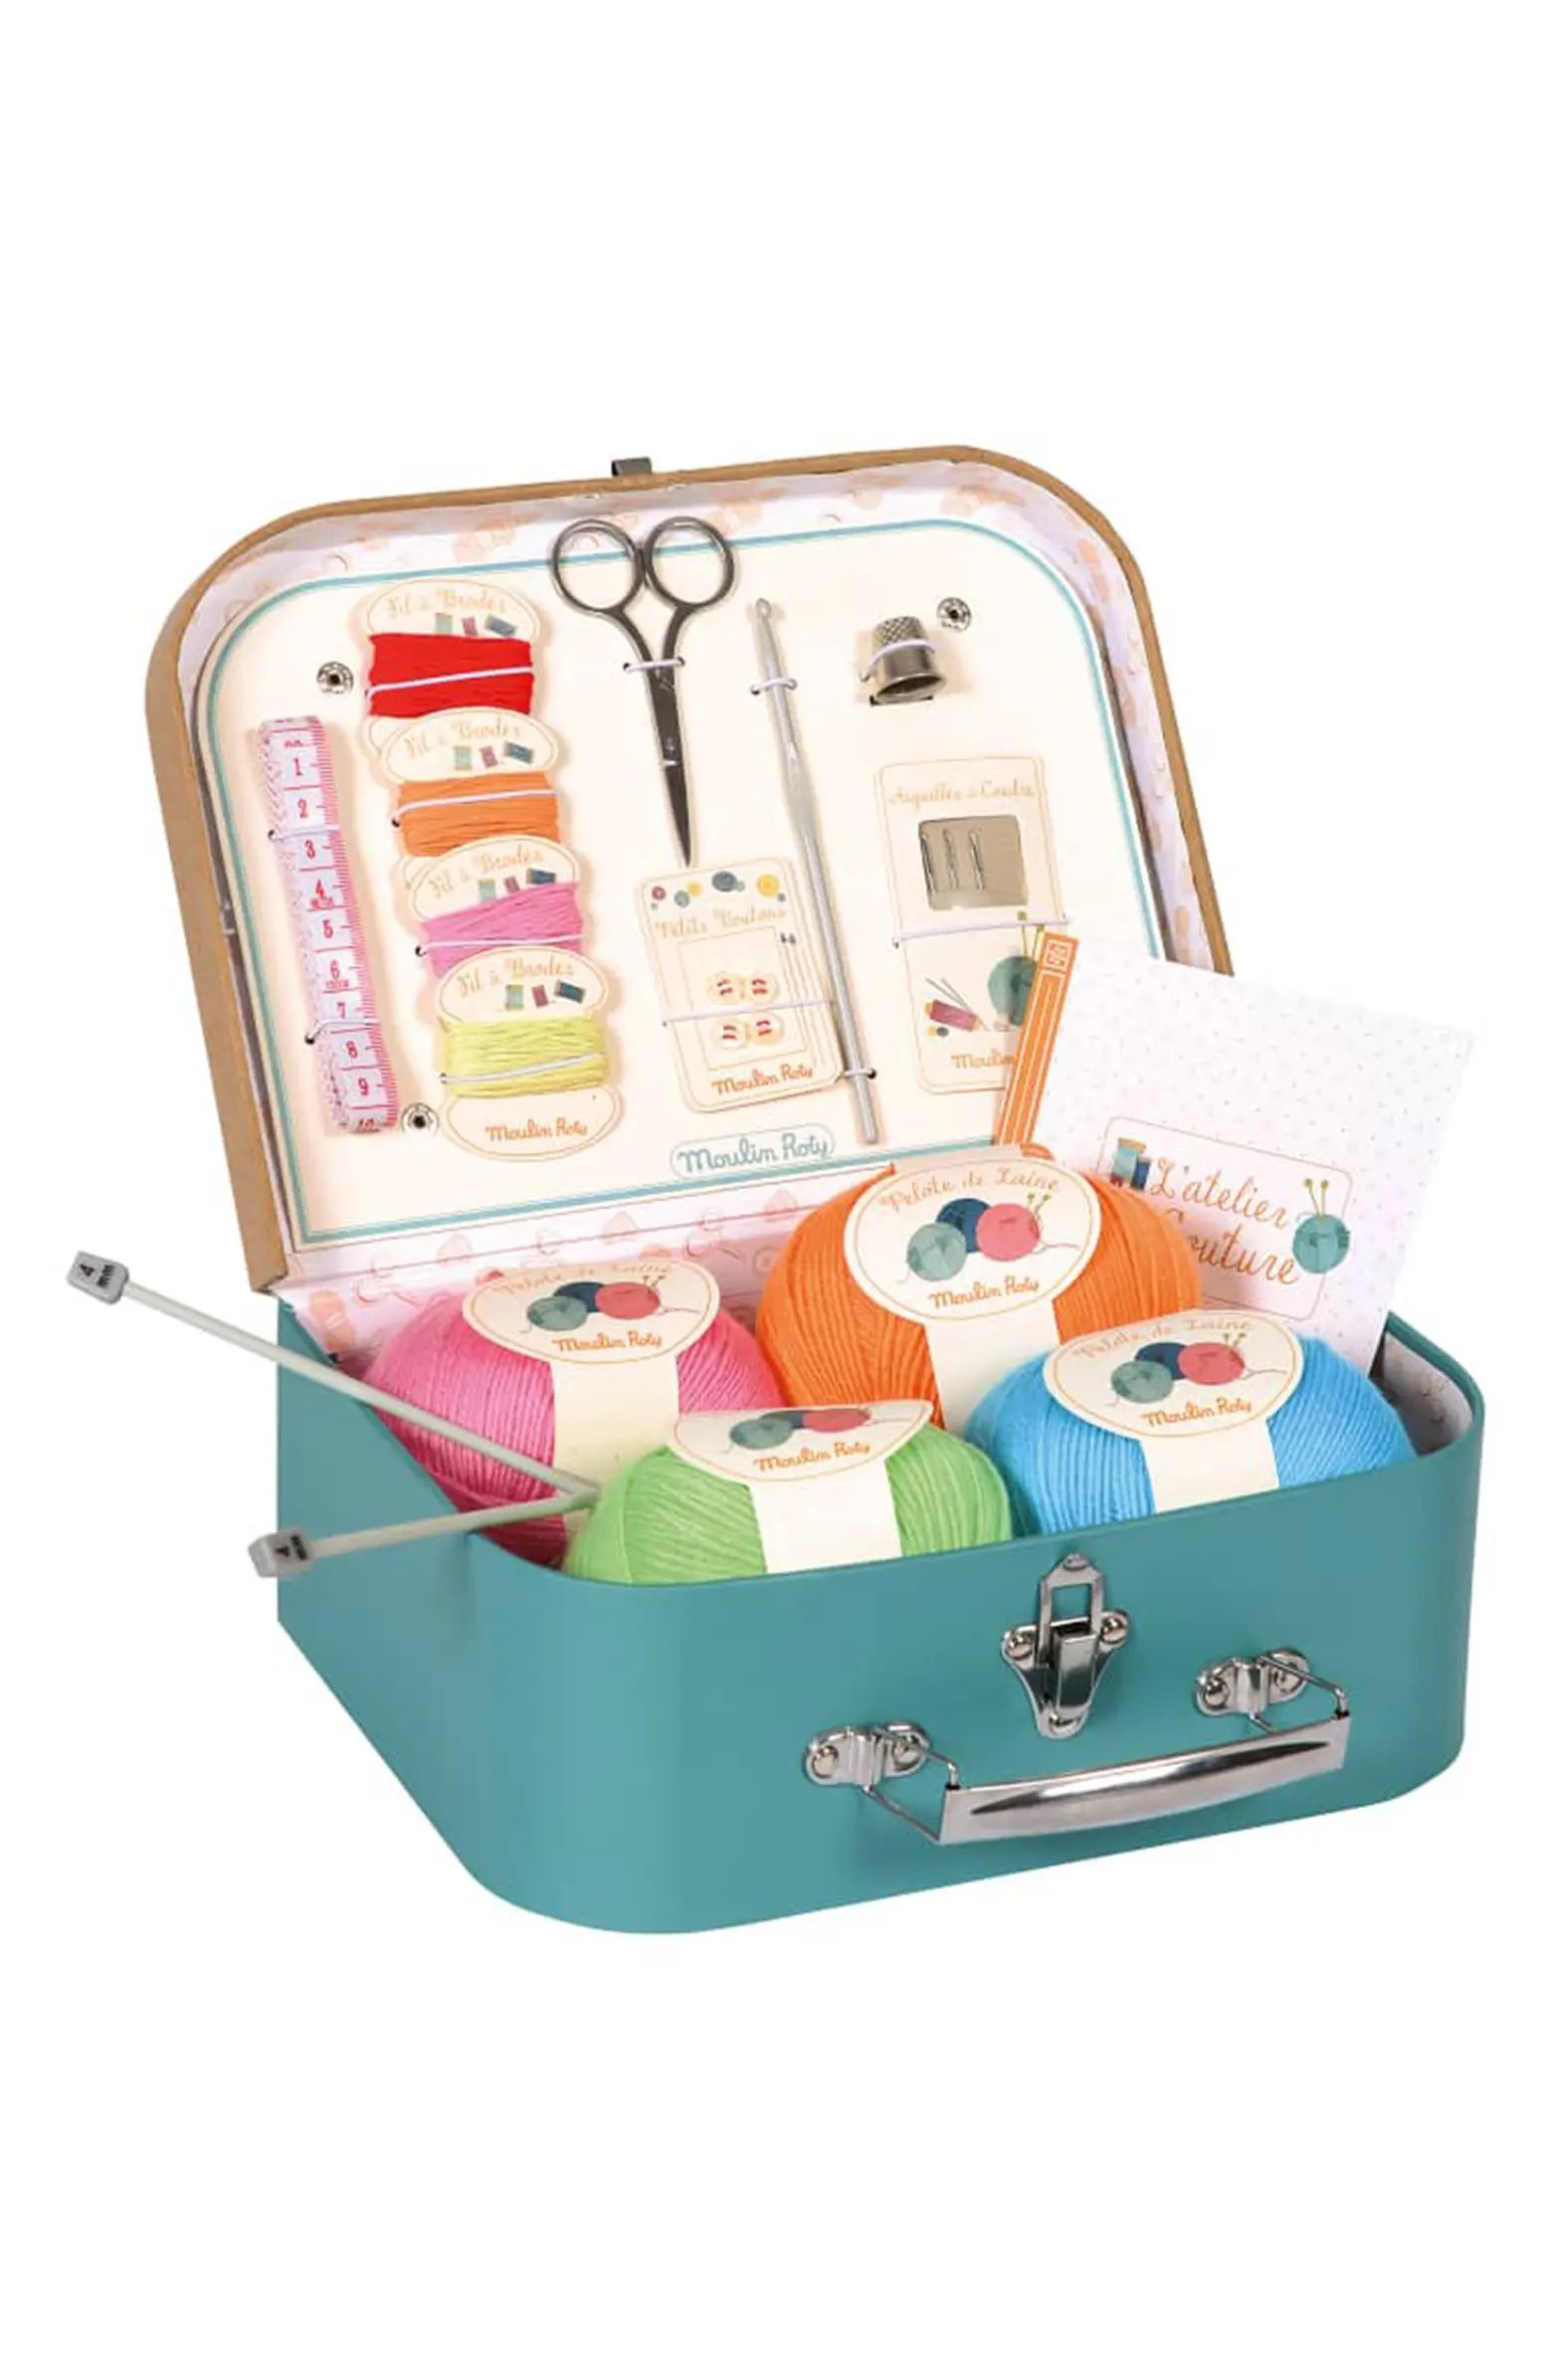 Sewing & Knitting Suitcase Set | Nordstrom